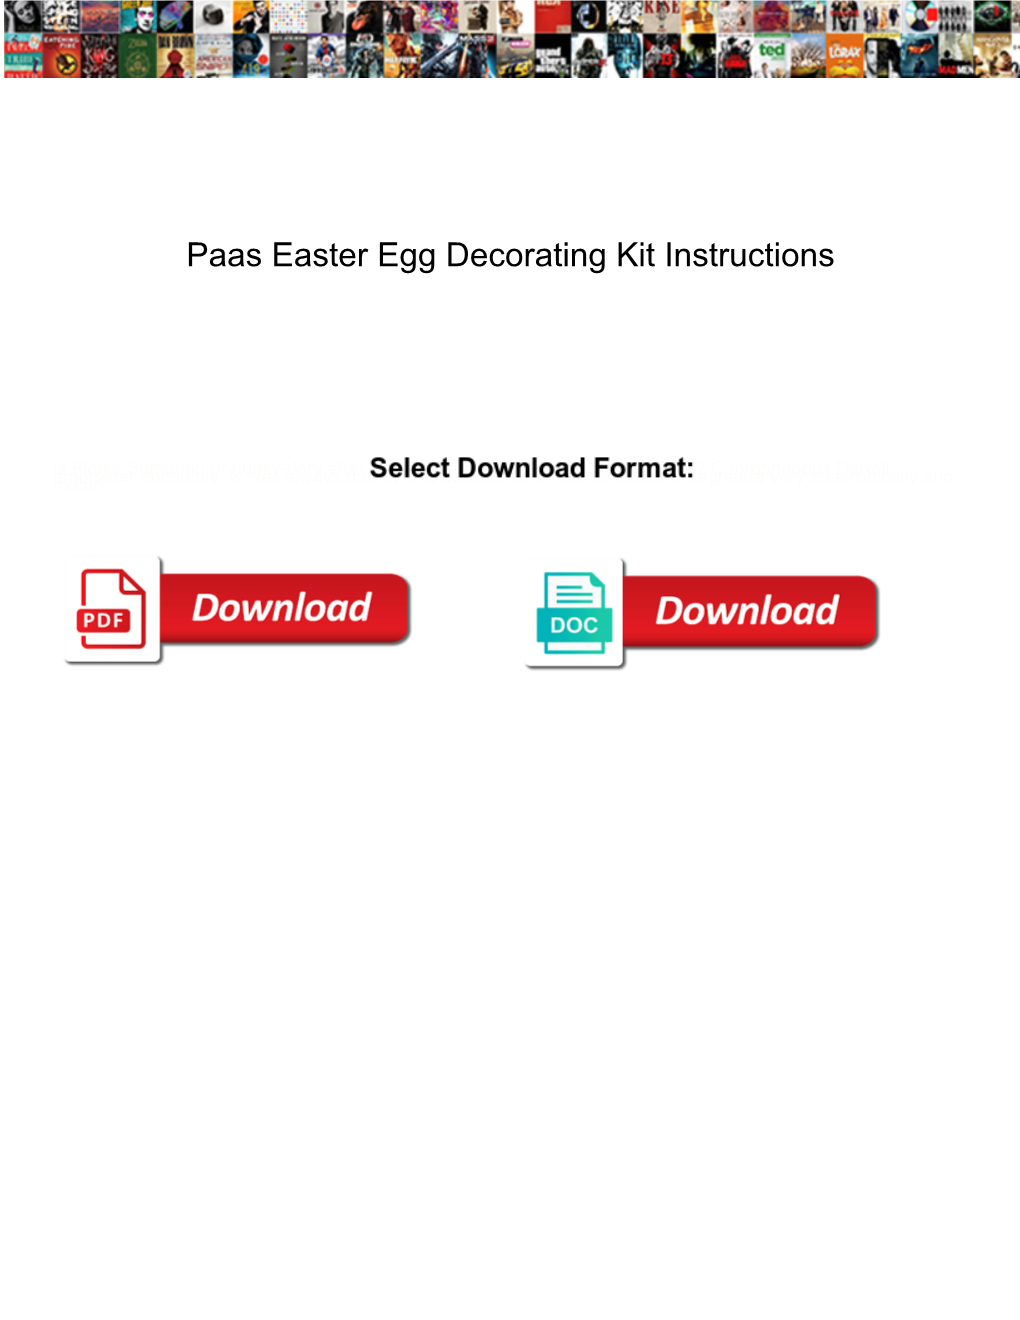 Paas Easter Egg Decorating Kit Instructions